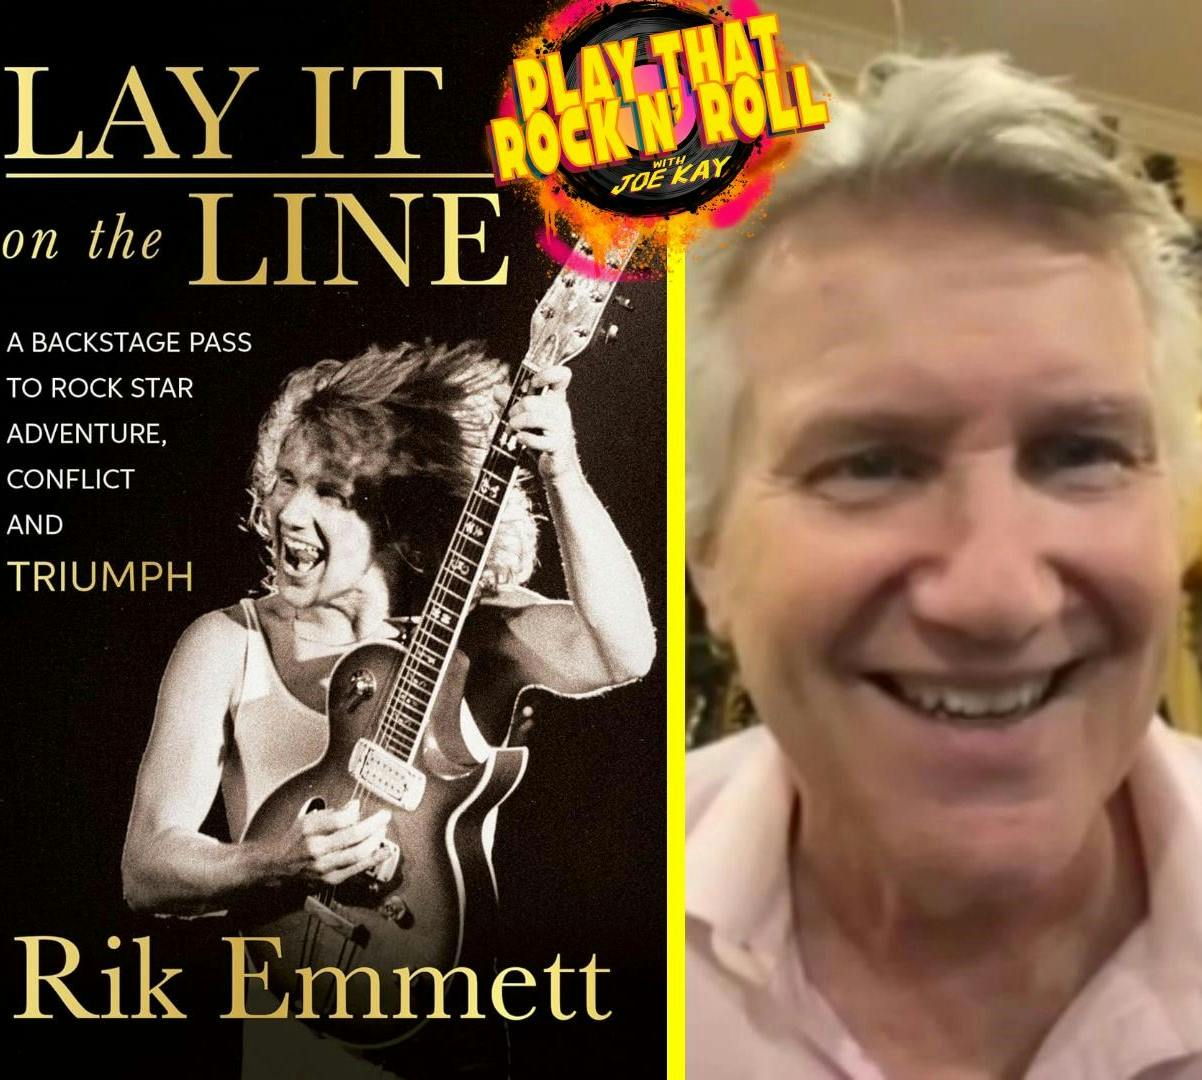 Ep 64: Interview w/ RIK EMMETT of TRIUMPH (Author of "LAY IT ON THE LINE")